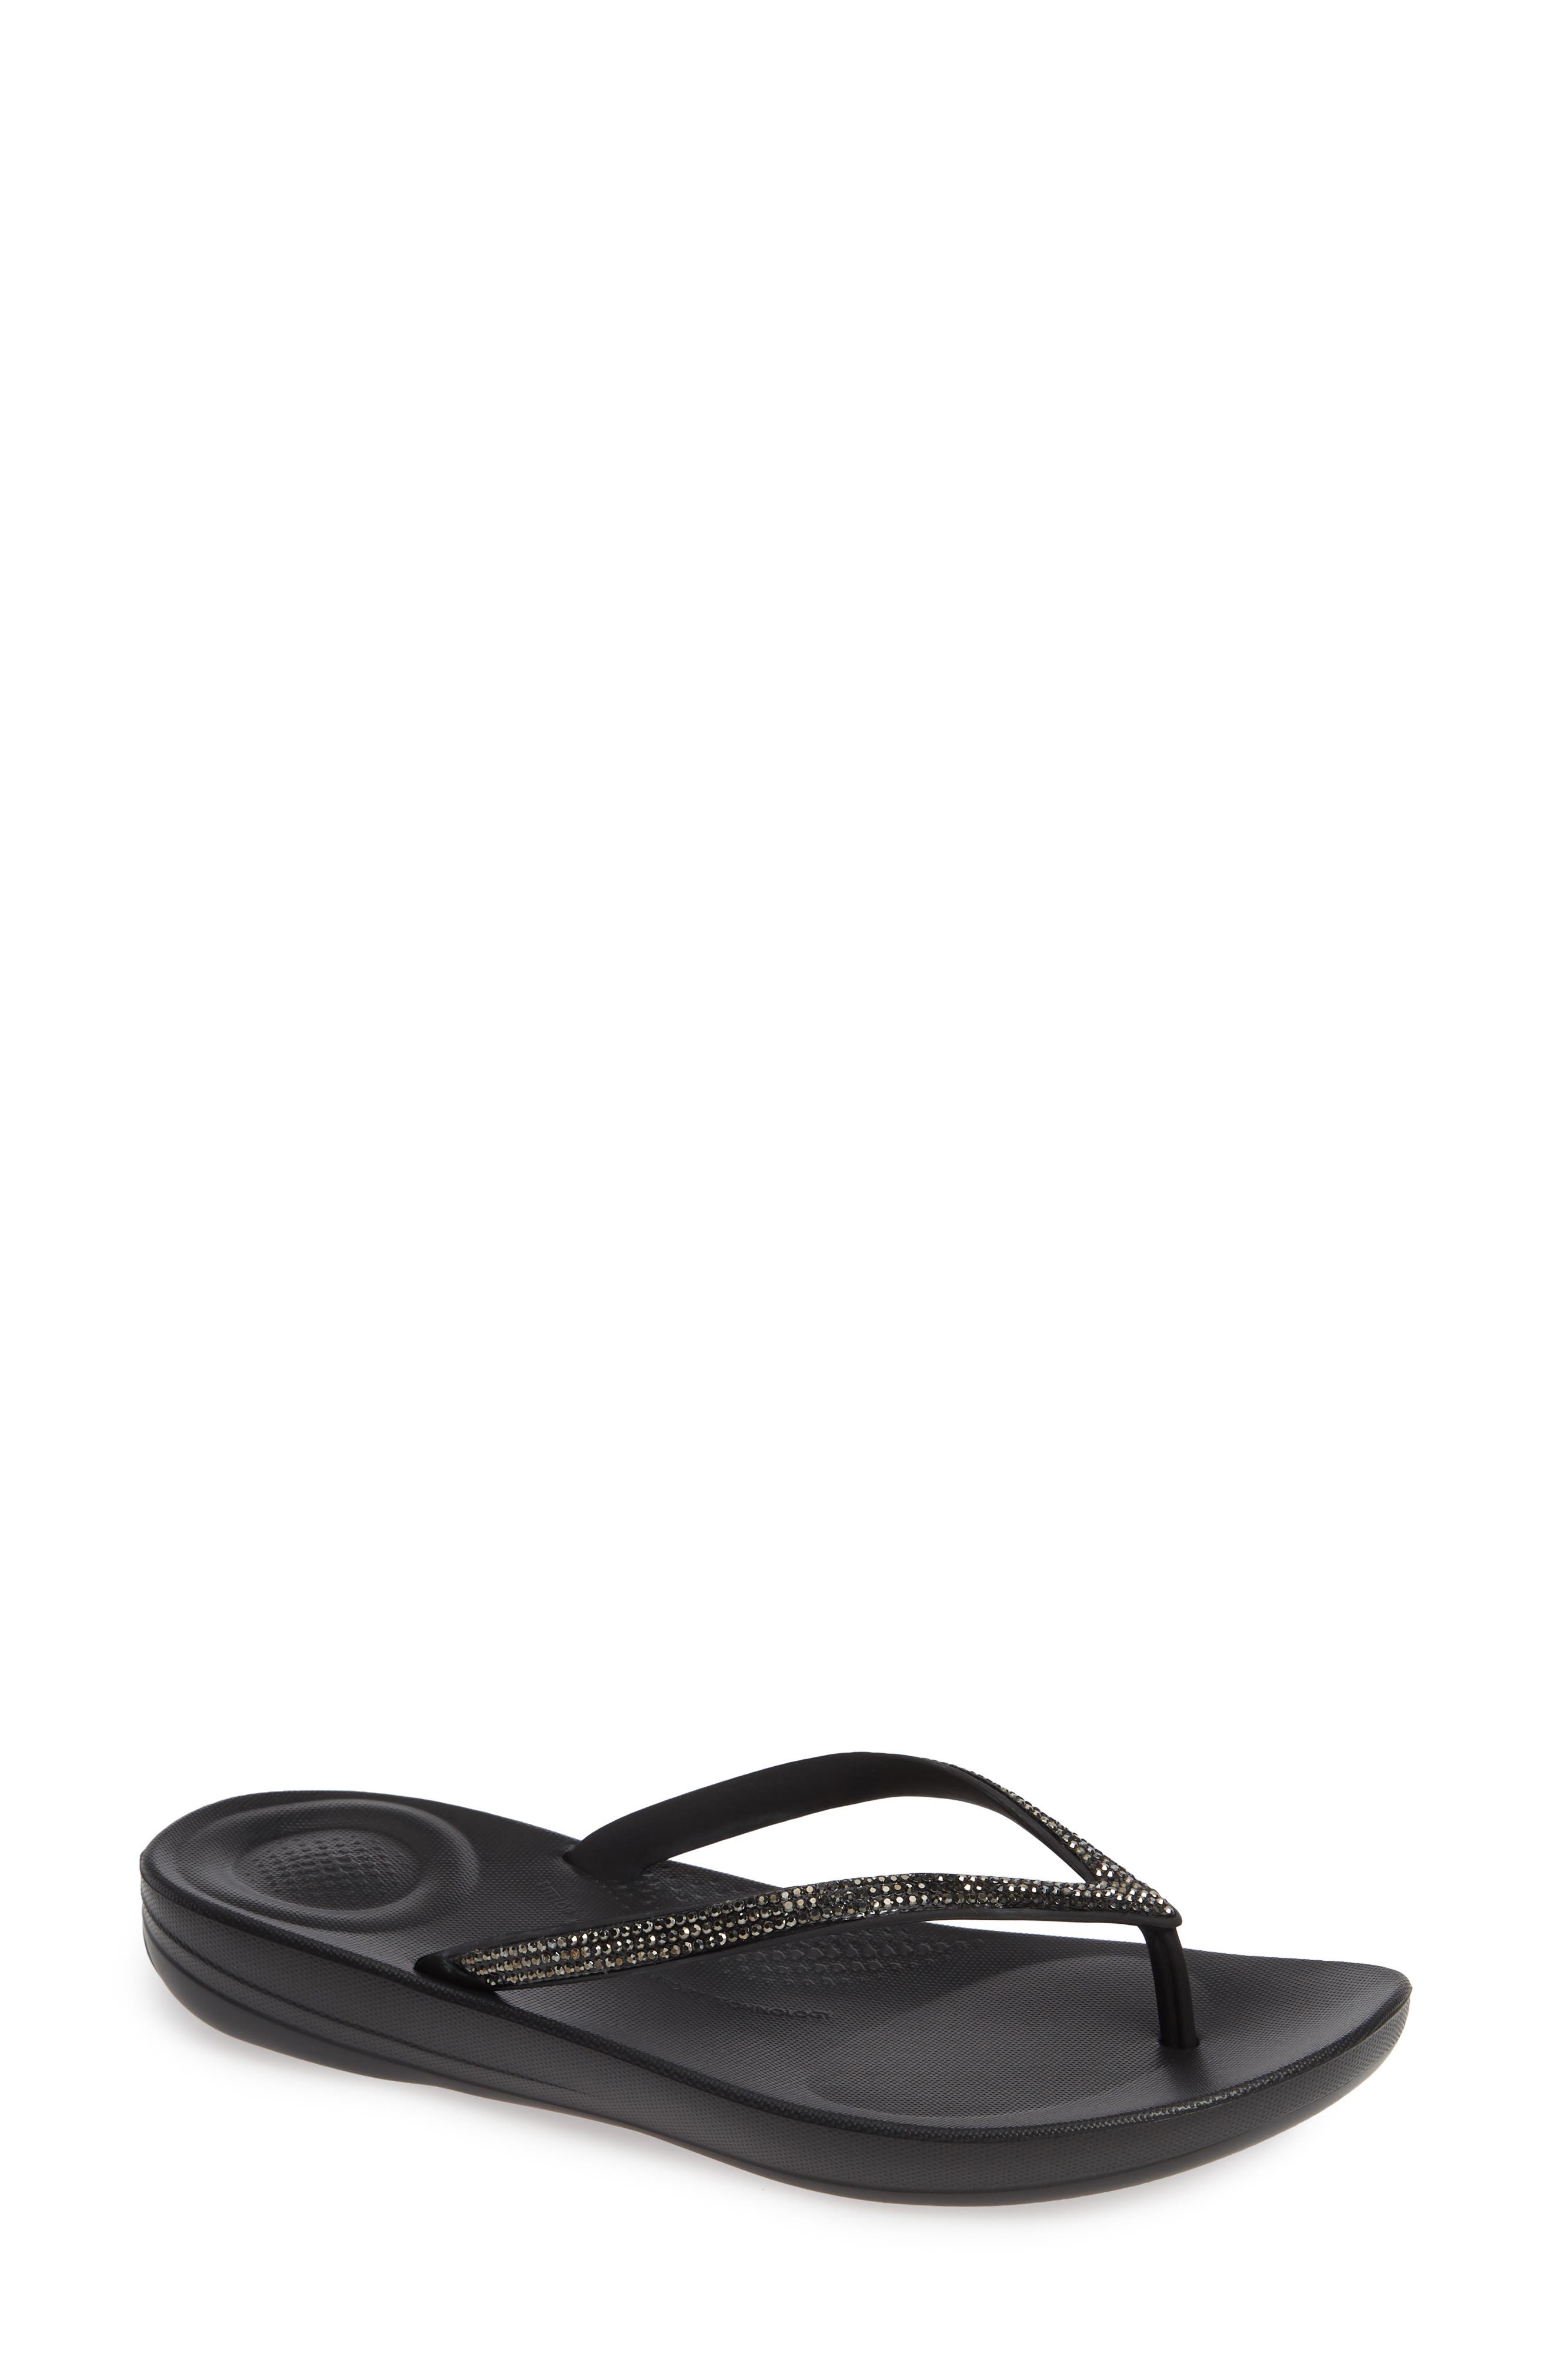 fitflop womens shoes on sale